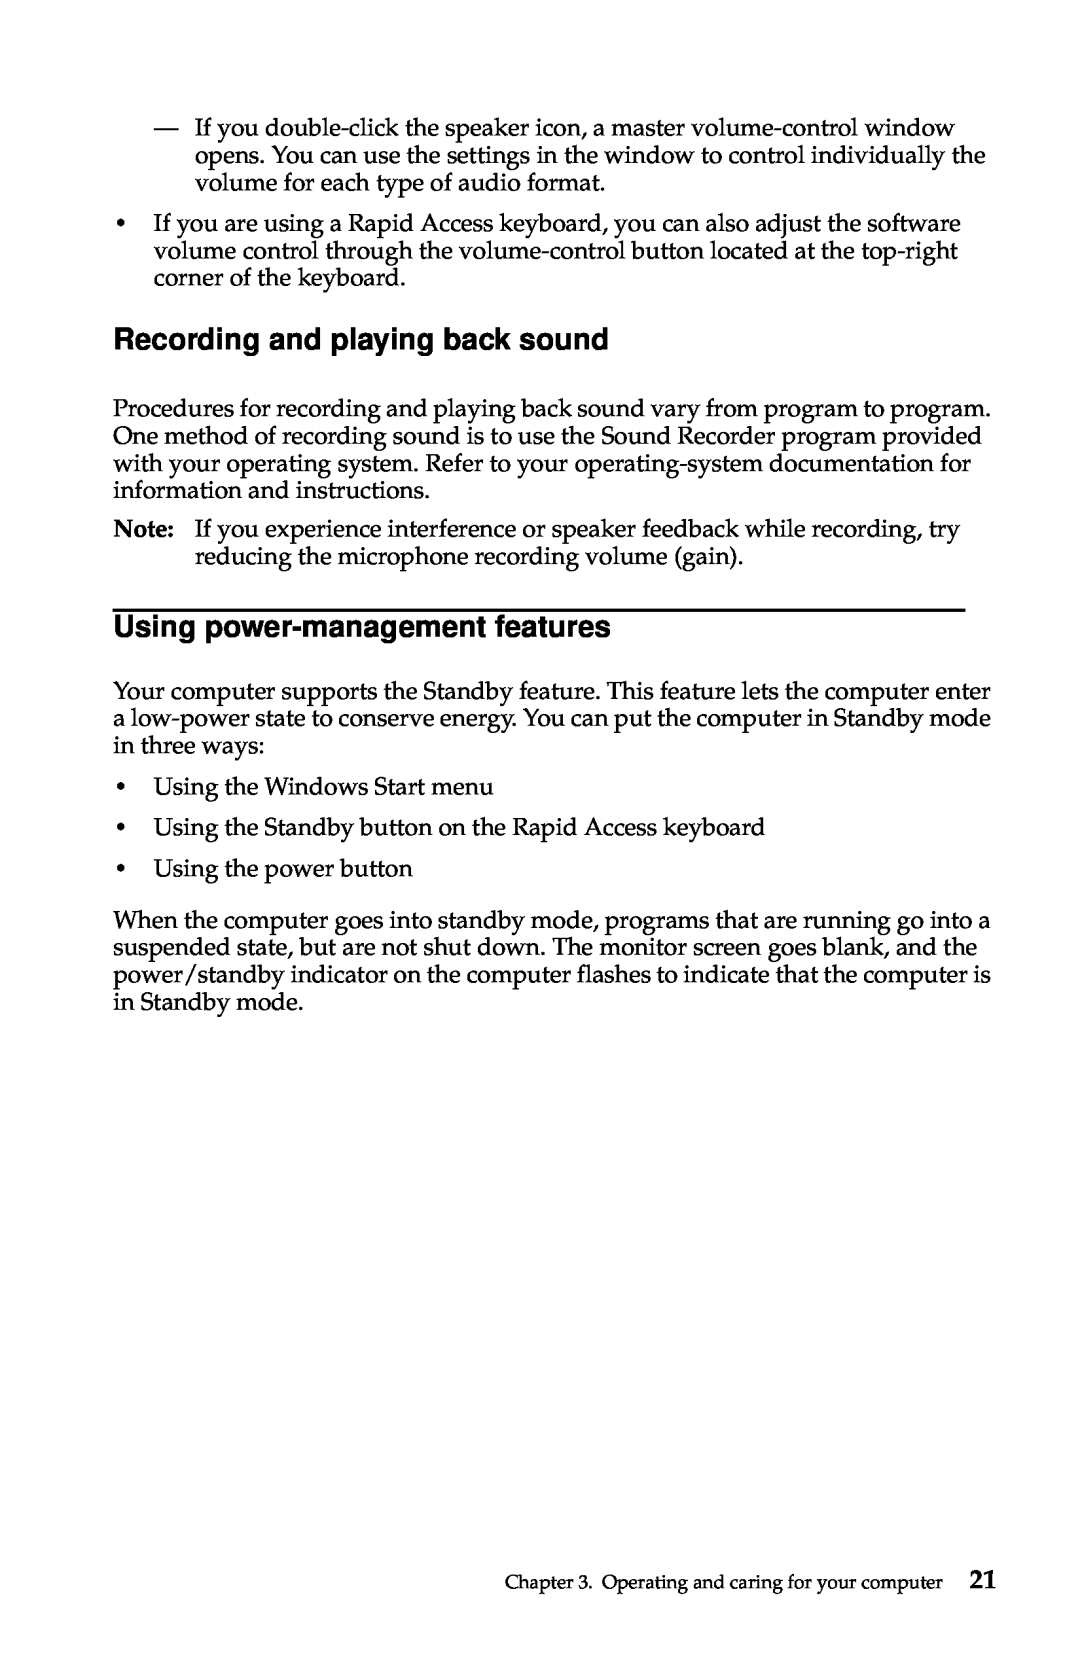 IBM 2283, 6274 manual Recording and playing back sound, Using power-management features 